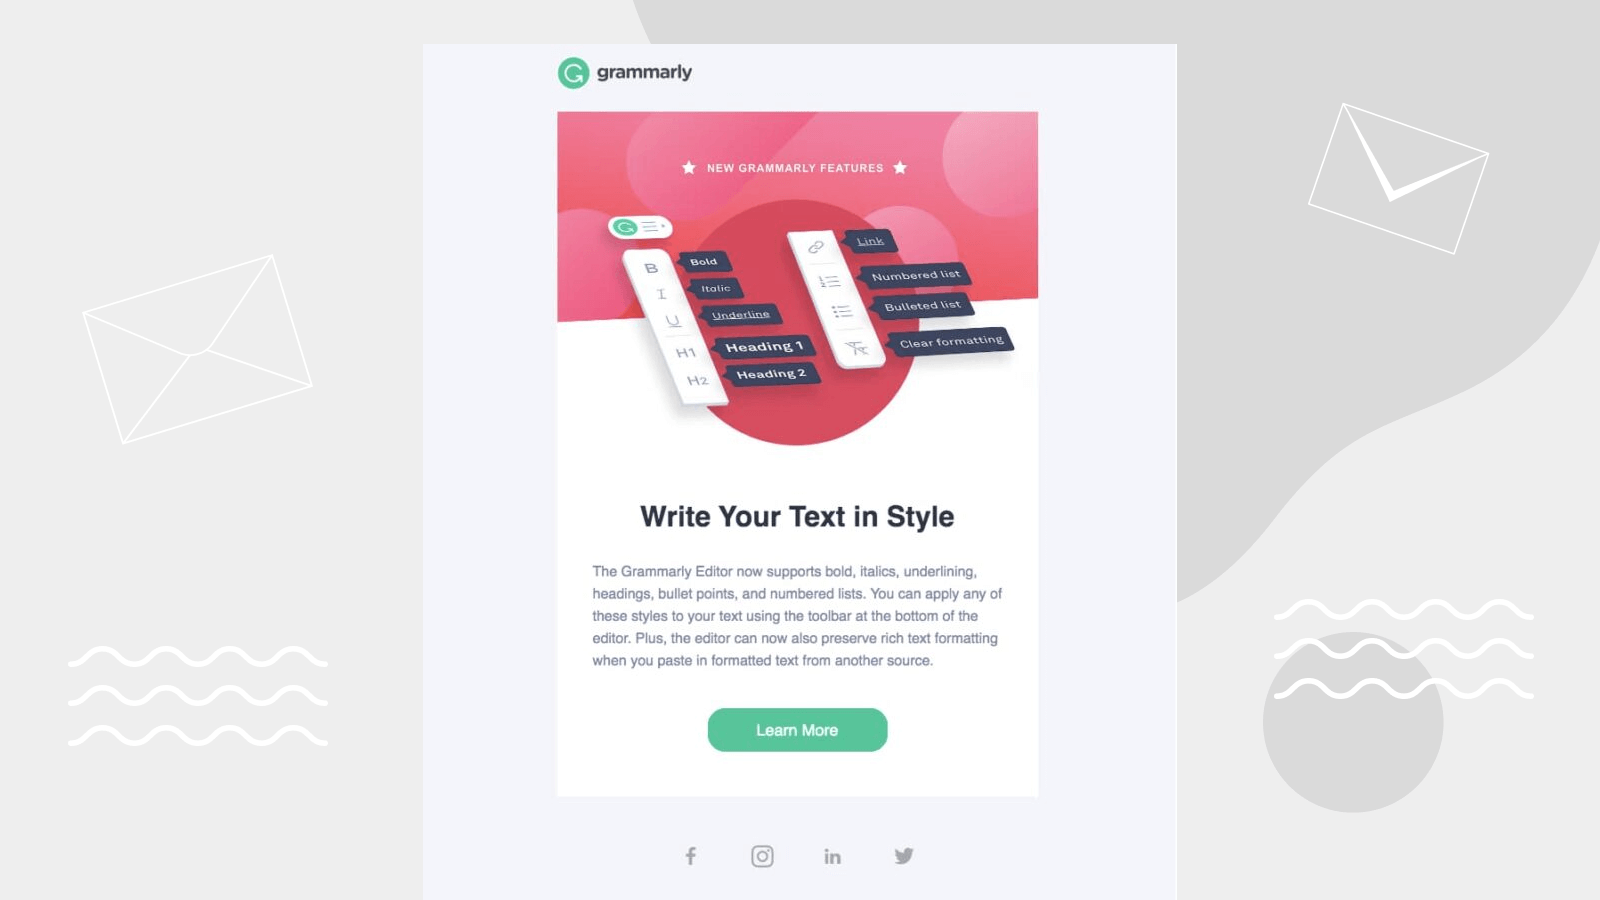 Grammarly product launch/feature announcement email example